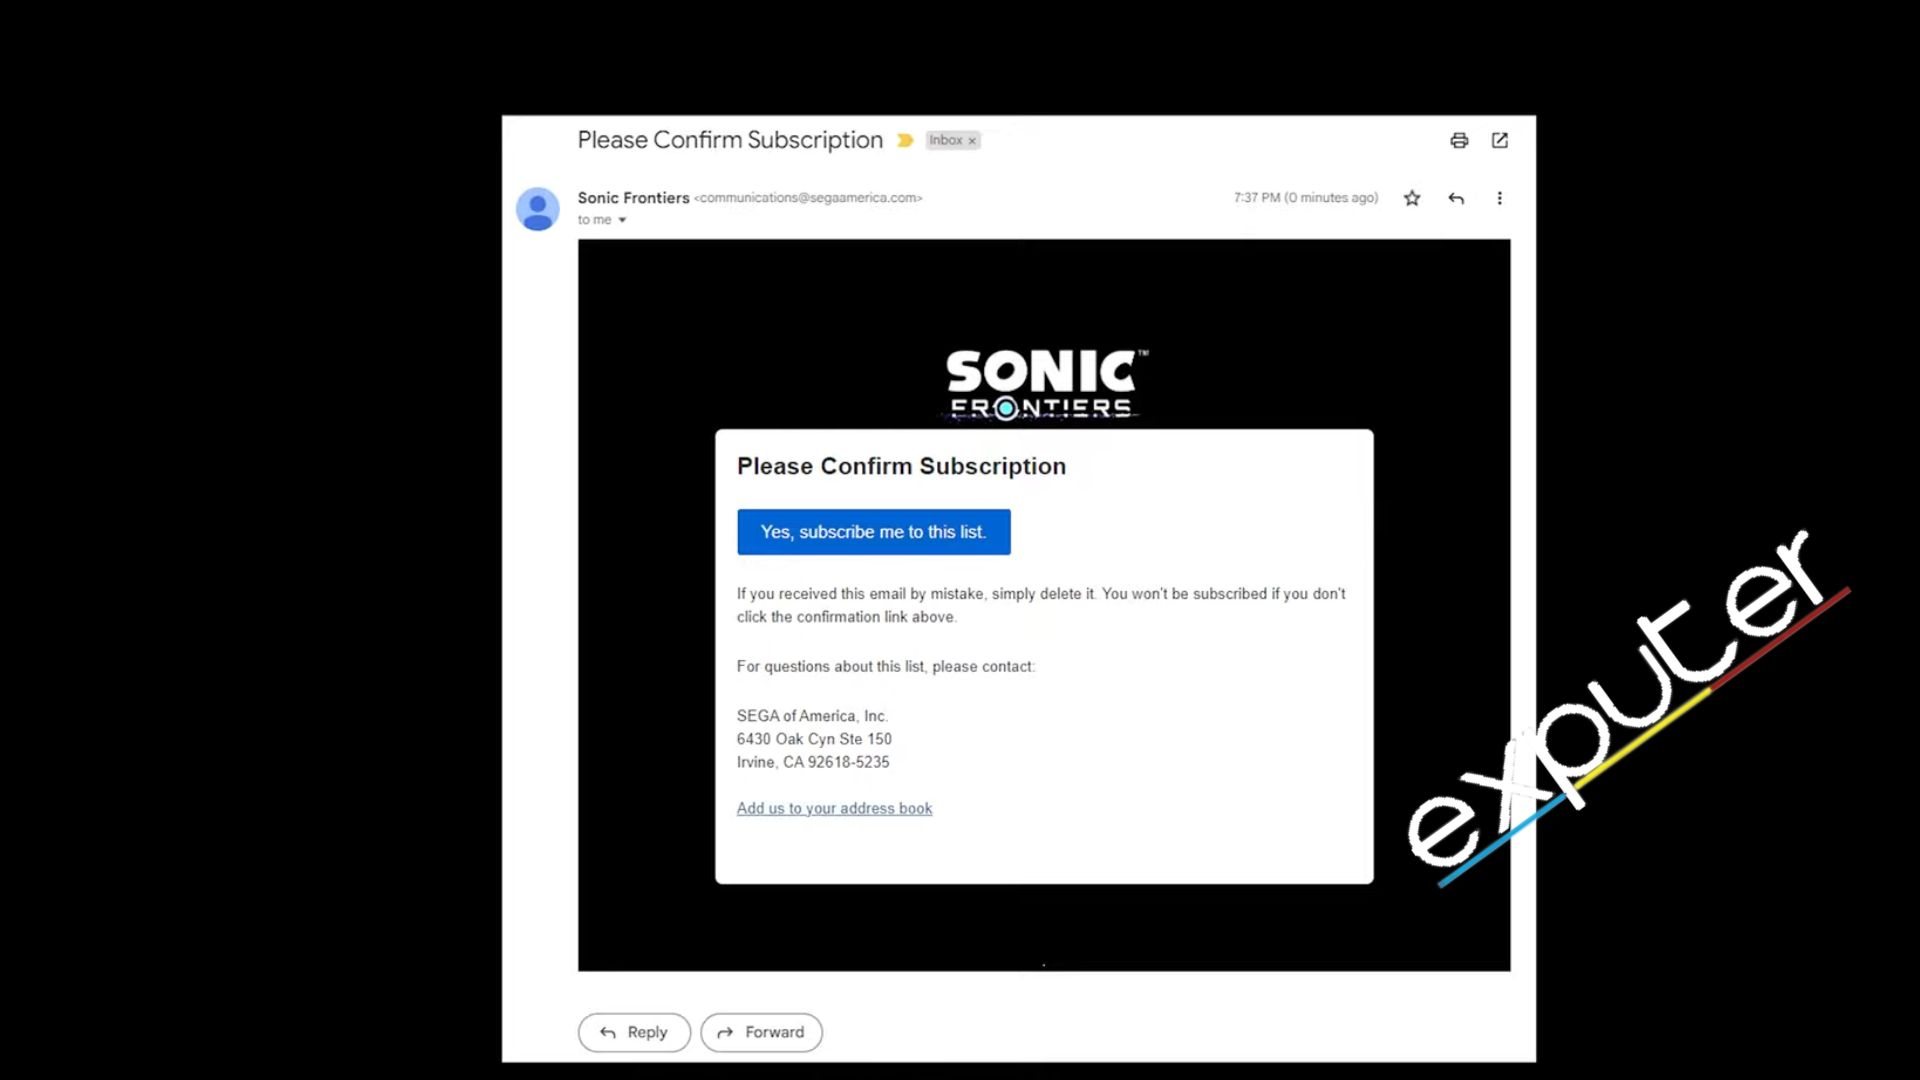 Soap Shoes Code Email Confirmation For Sonic Frontiers